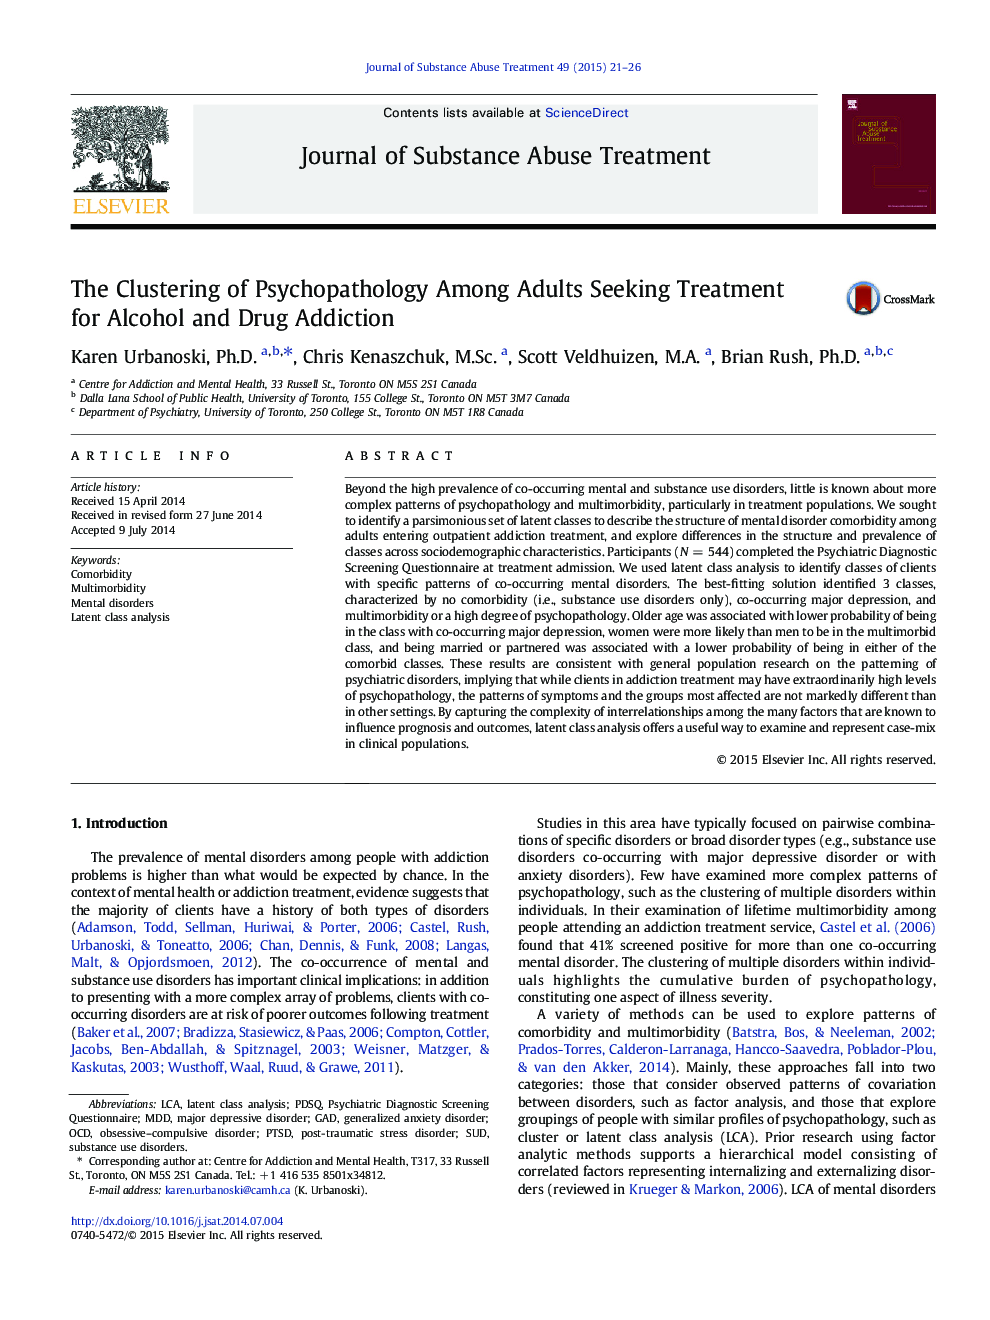 The Clustering of Psychopathology Among Adults Seeking Treatment for Alcohol and Drug Addiction